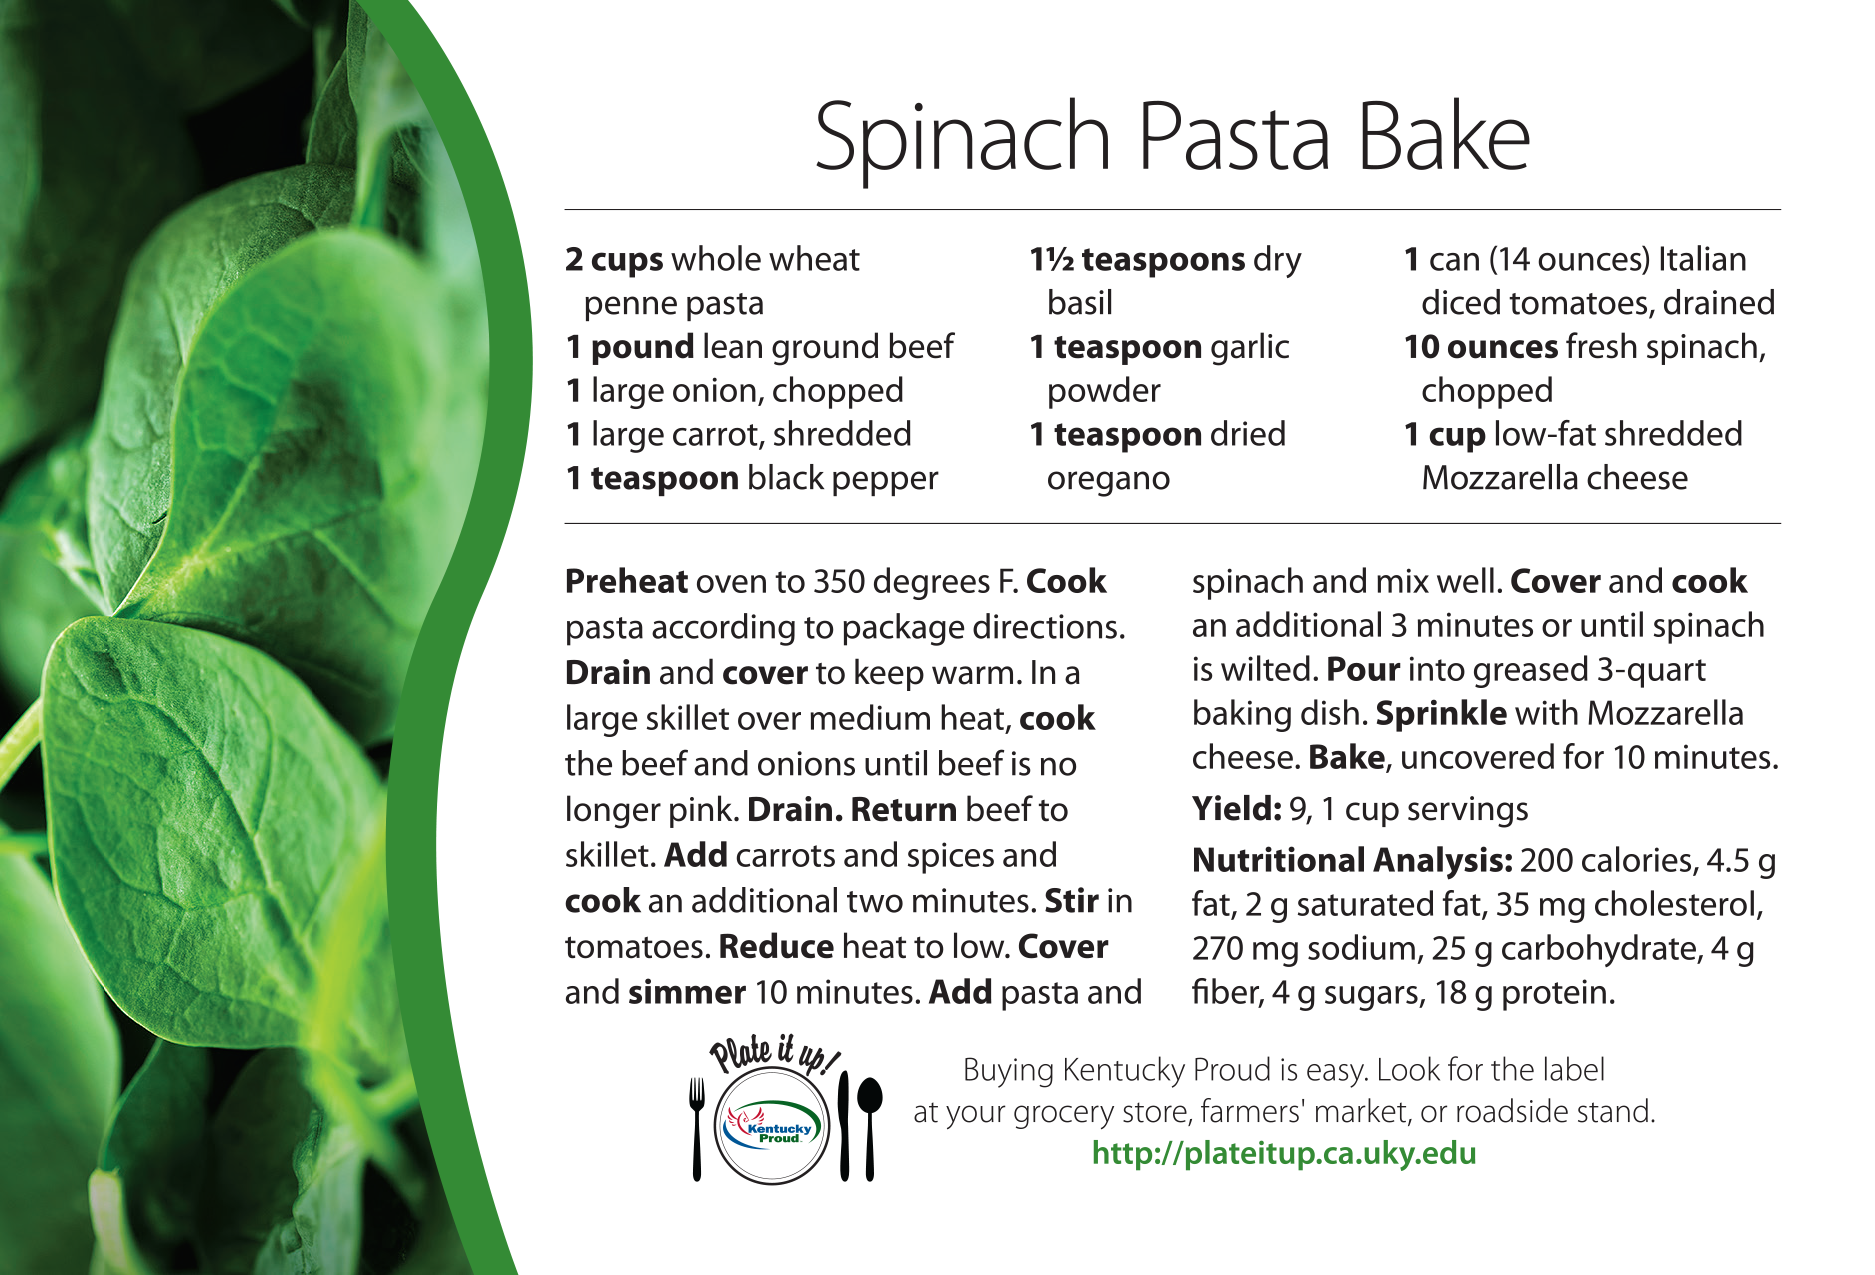 Spinach Past Bake recipe